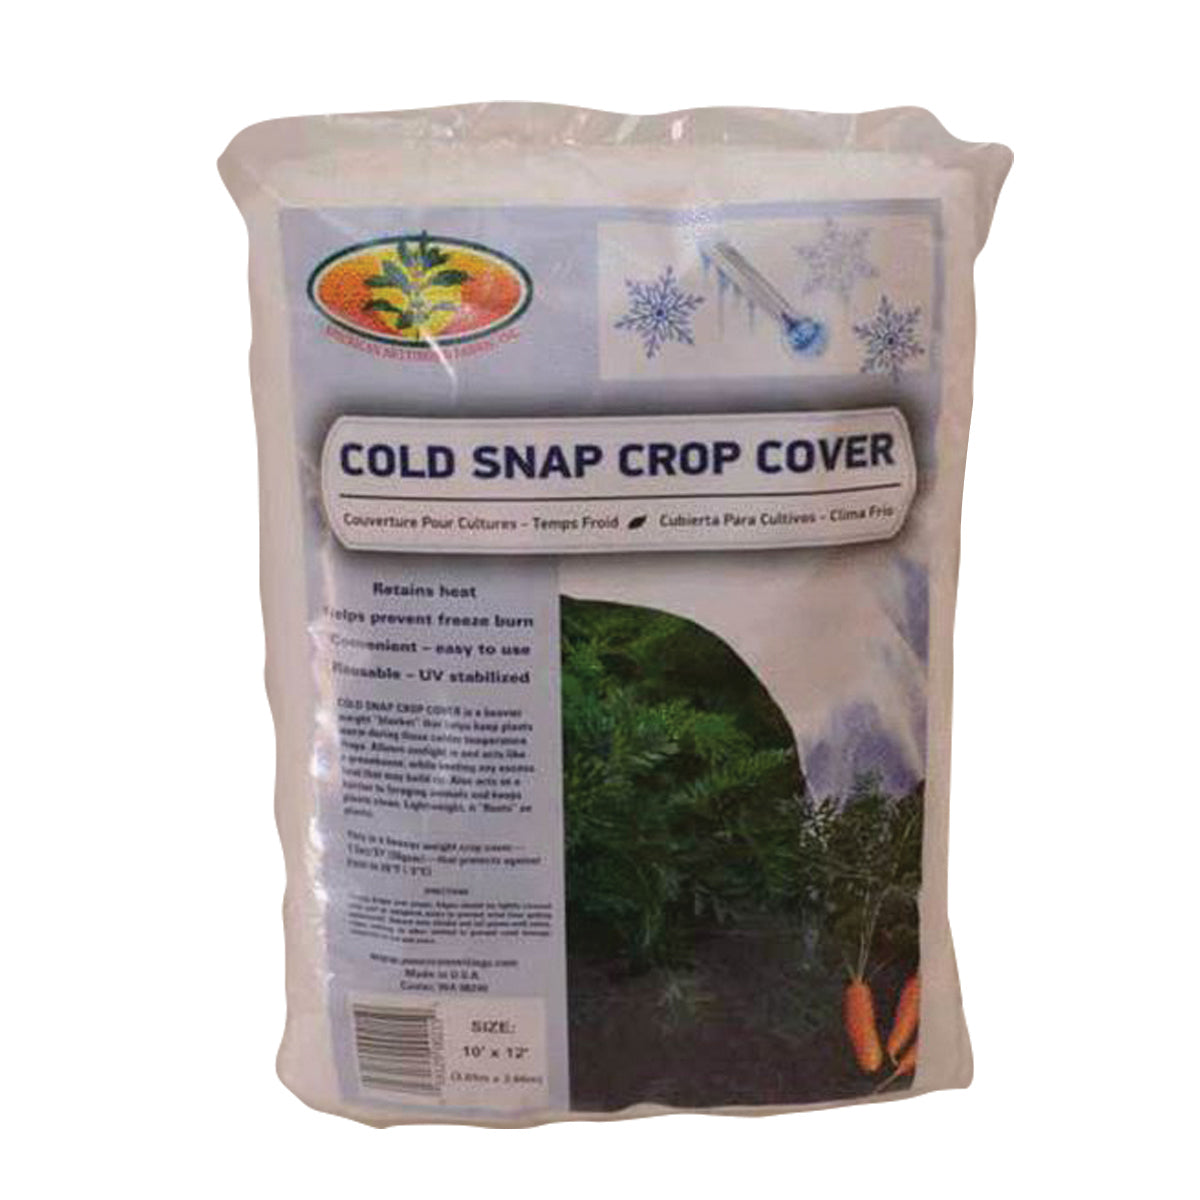 Cold Snap Crop Cover (50g) 12' x 10'